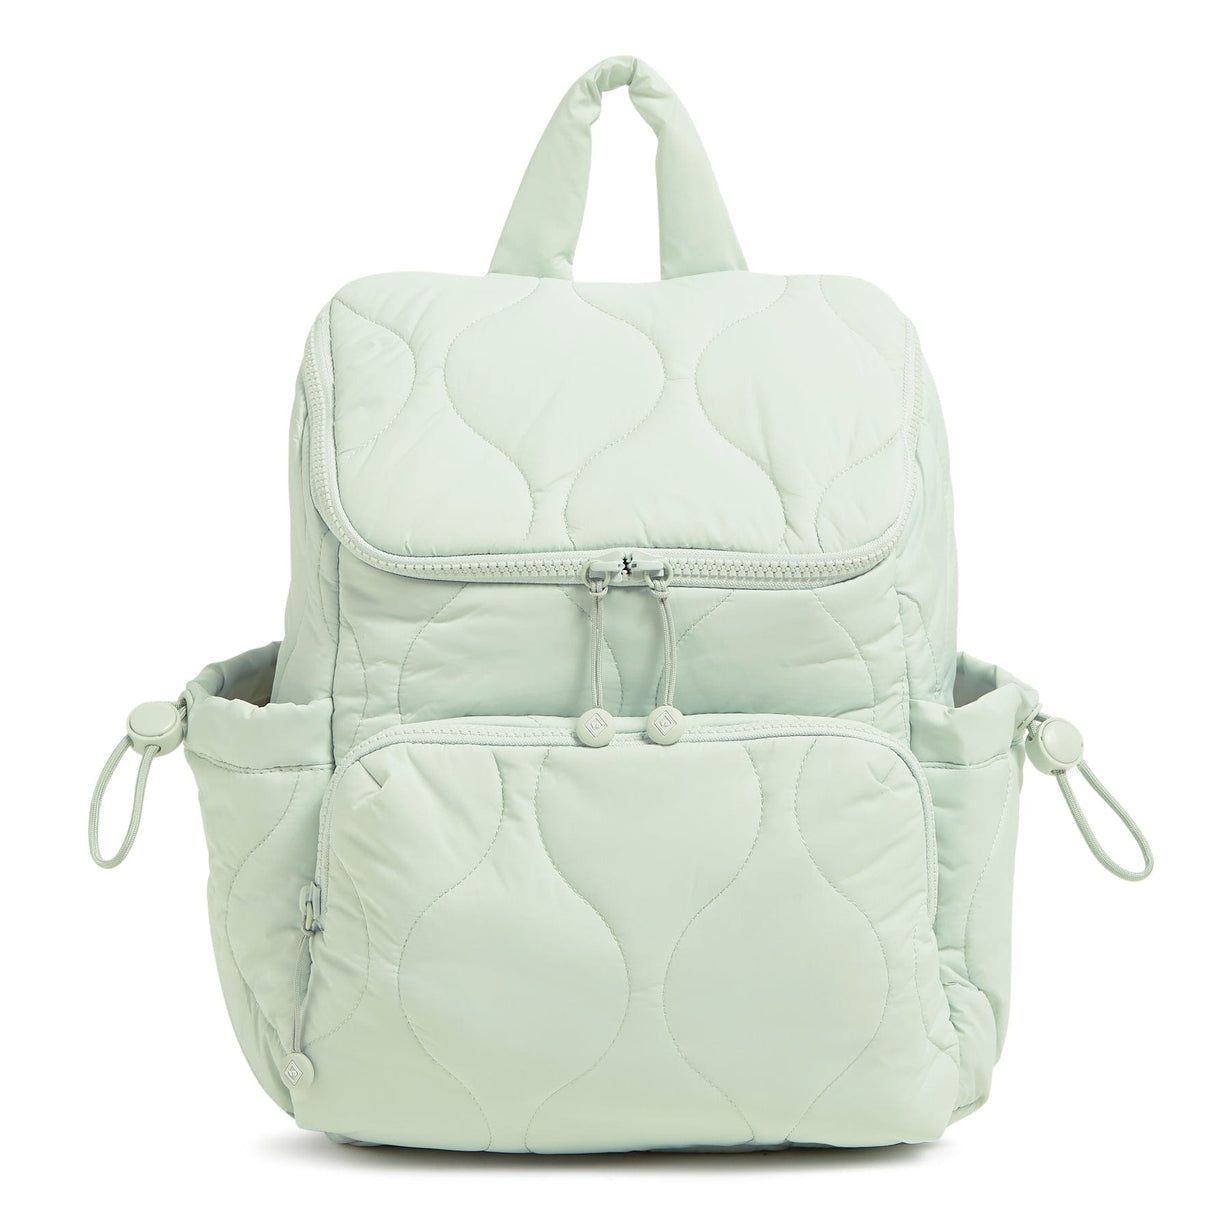 Vera Bradley Featherweight Backpack : Calm Mint - Image 1